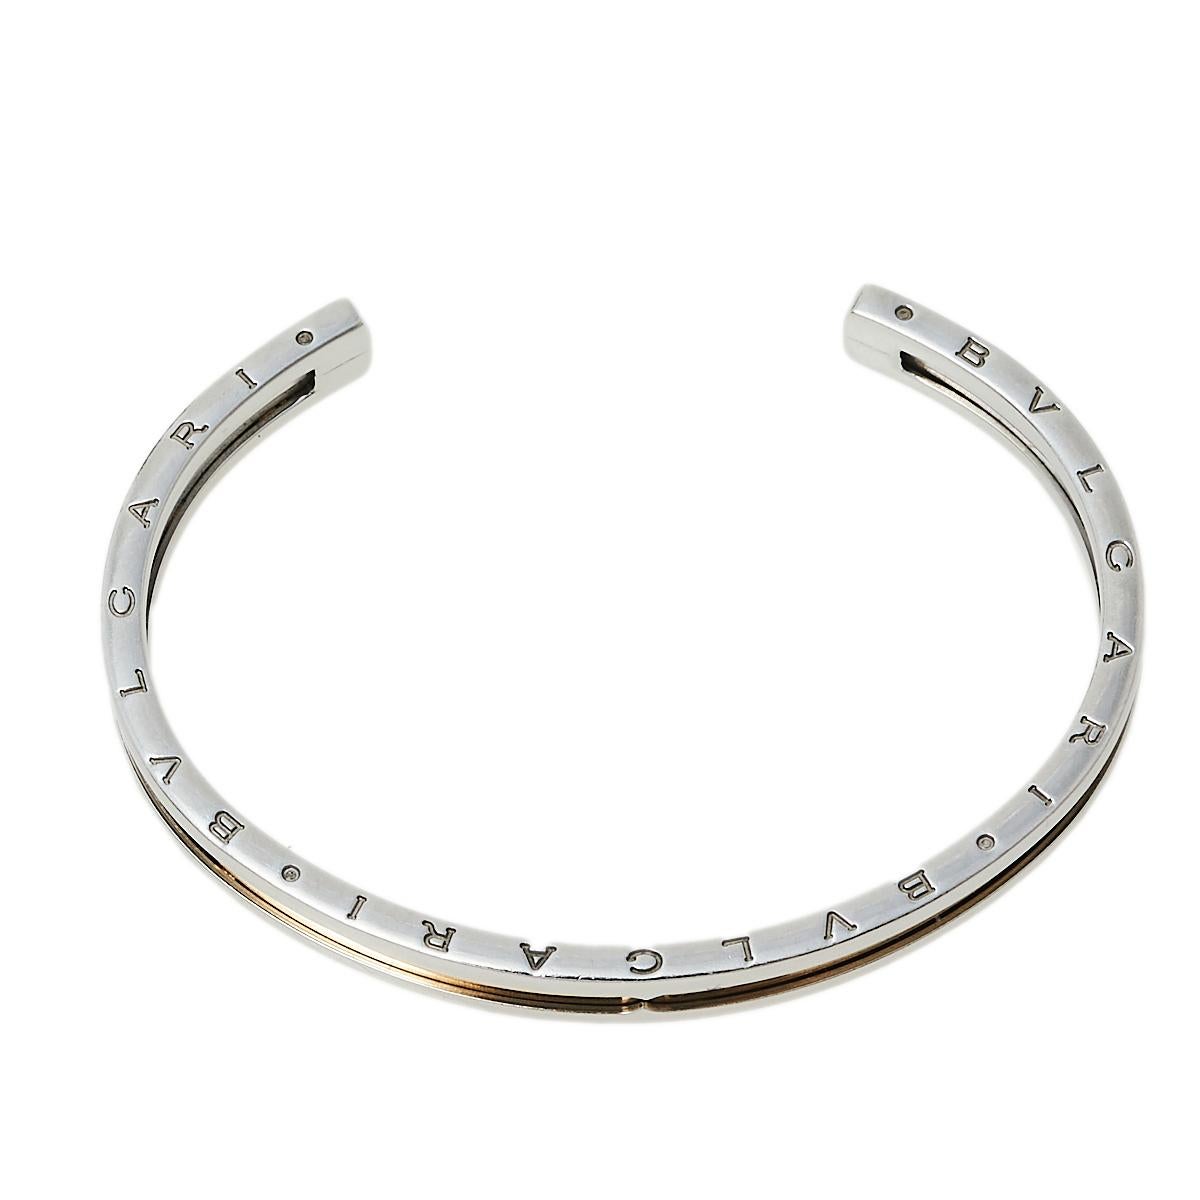 Adorn your wrist with this stunner of a bracelet from Bvlgari. The piece is from their B.Zero1 collection and has been crafted from stainless steel and 18k rose gold into an open cuff style. It is complete with the brand's lettering on the contours.